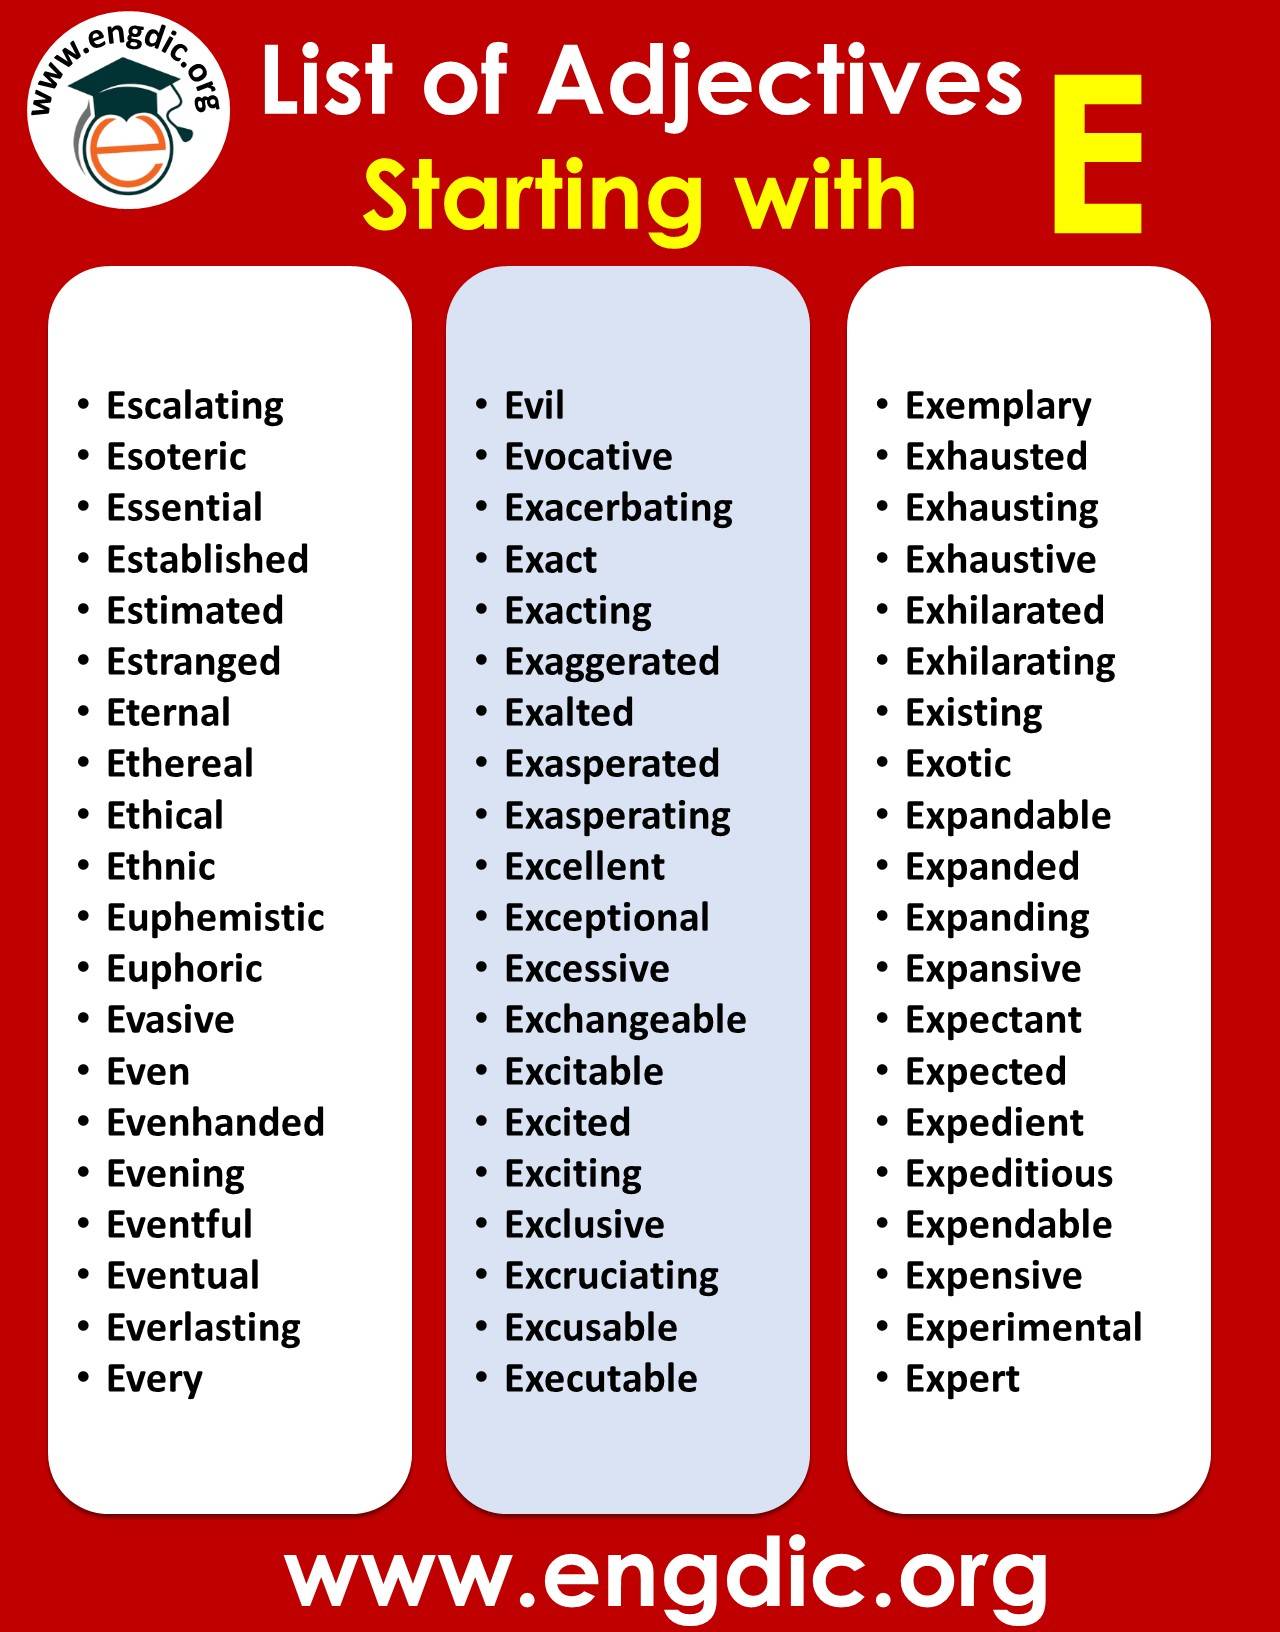 adjectives that start with e to describe a person positively